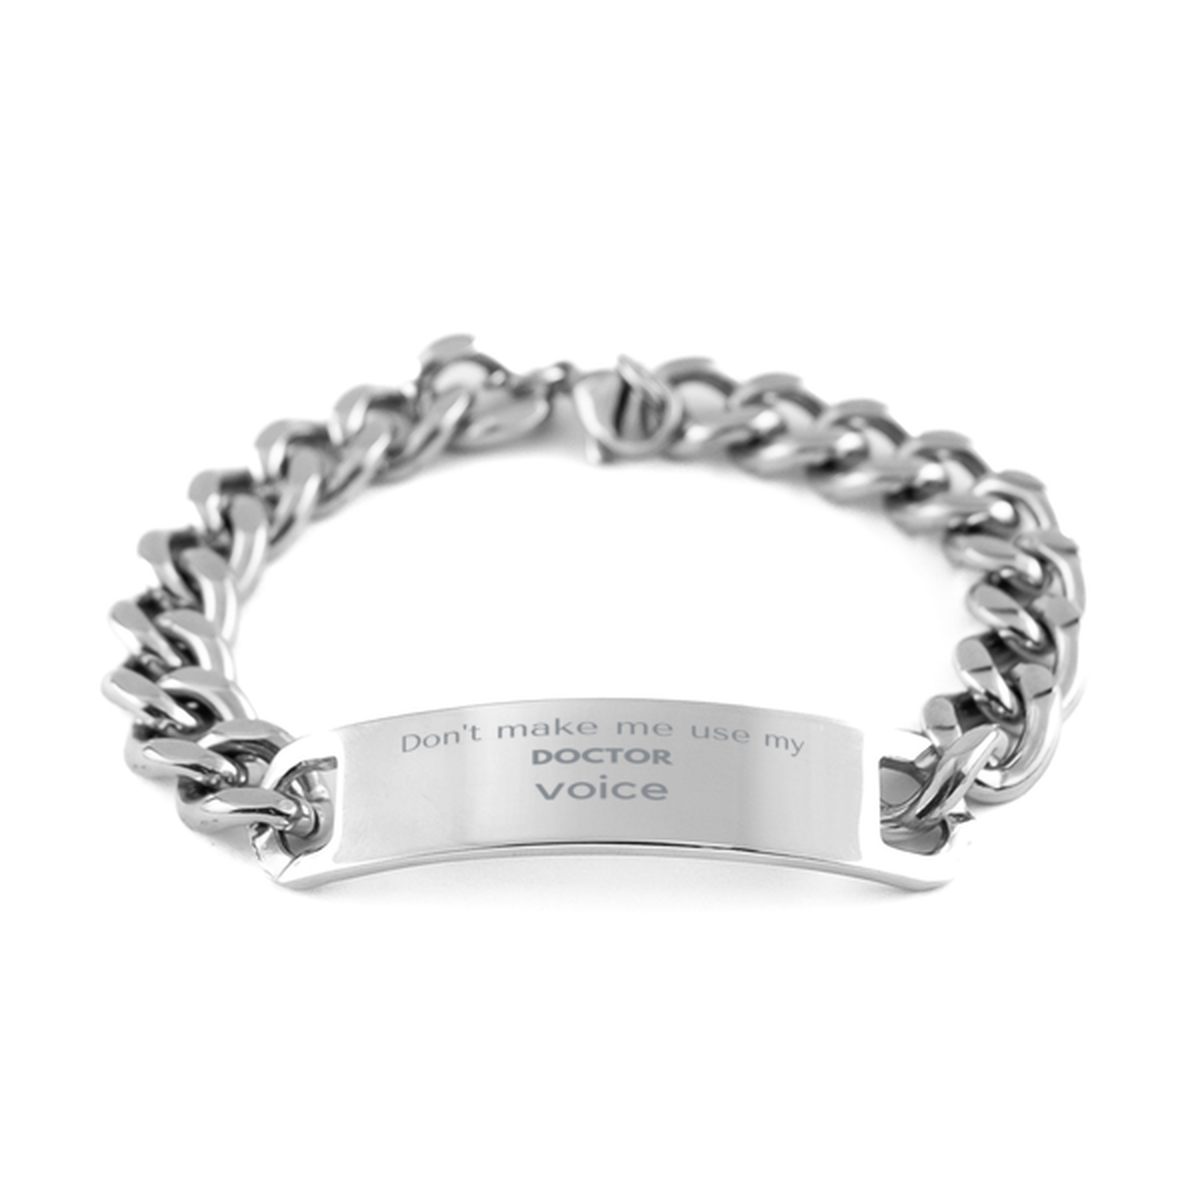 Don't make me use my Doctor voice, Sarcasm Doctor Gifts, Christmas Doctor Cuban Chain Stainless Steel Bracelet Birthday Unique Gifts For Doctor Coworkers, Men, Women, Colleague, Friends